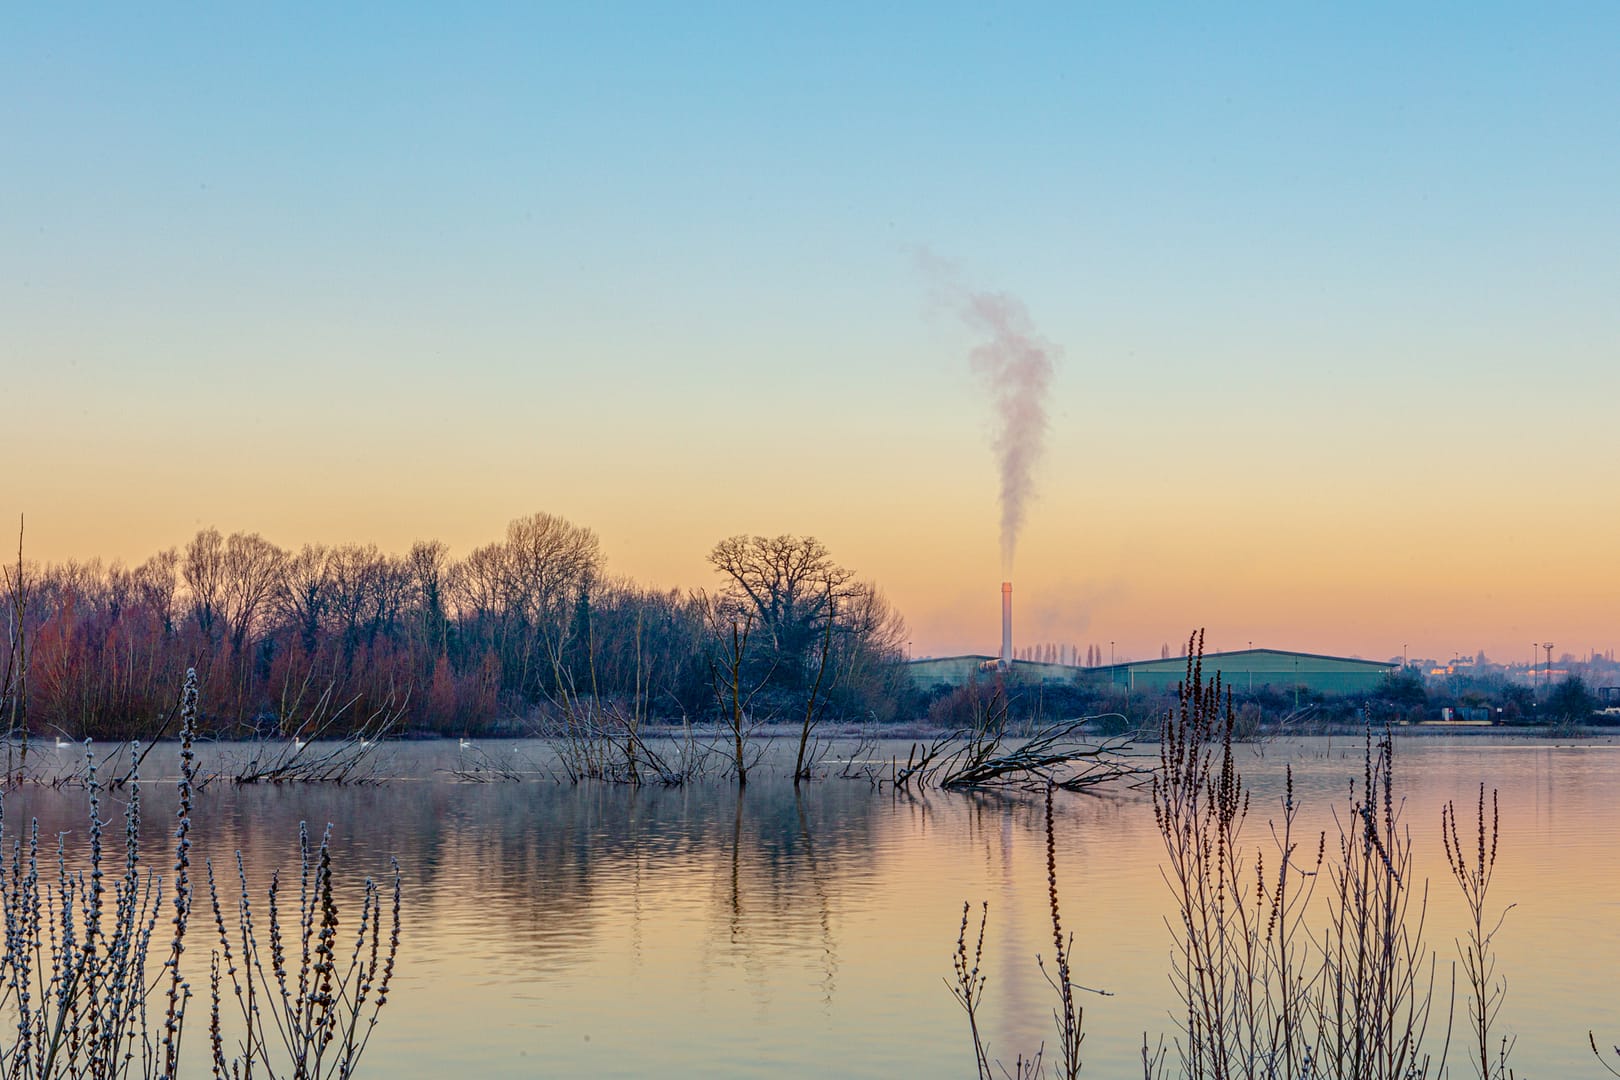 Dawn looking over the waters near Aldermaston Wharf. Winters day highlights the industrial area just passed the canal.